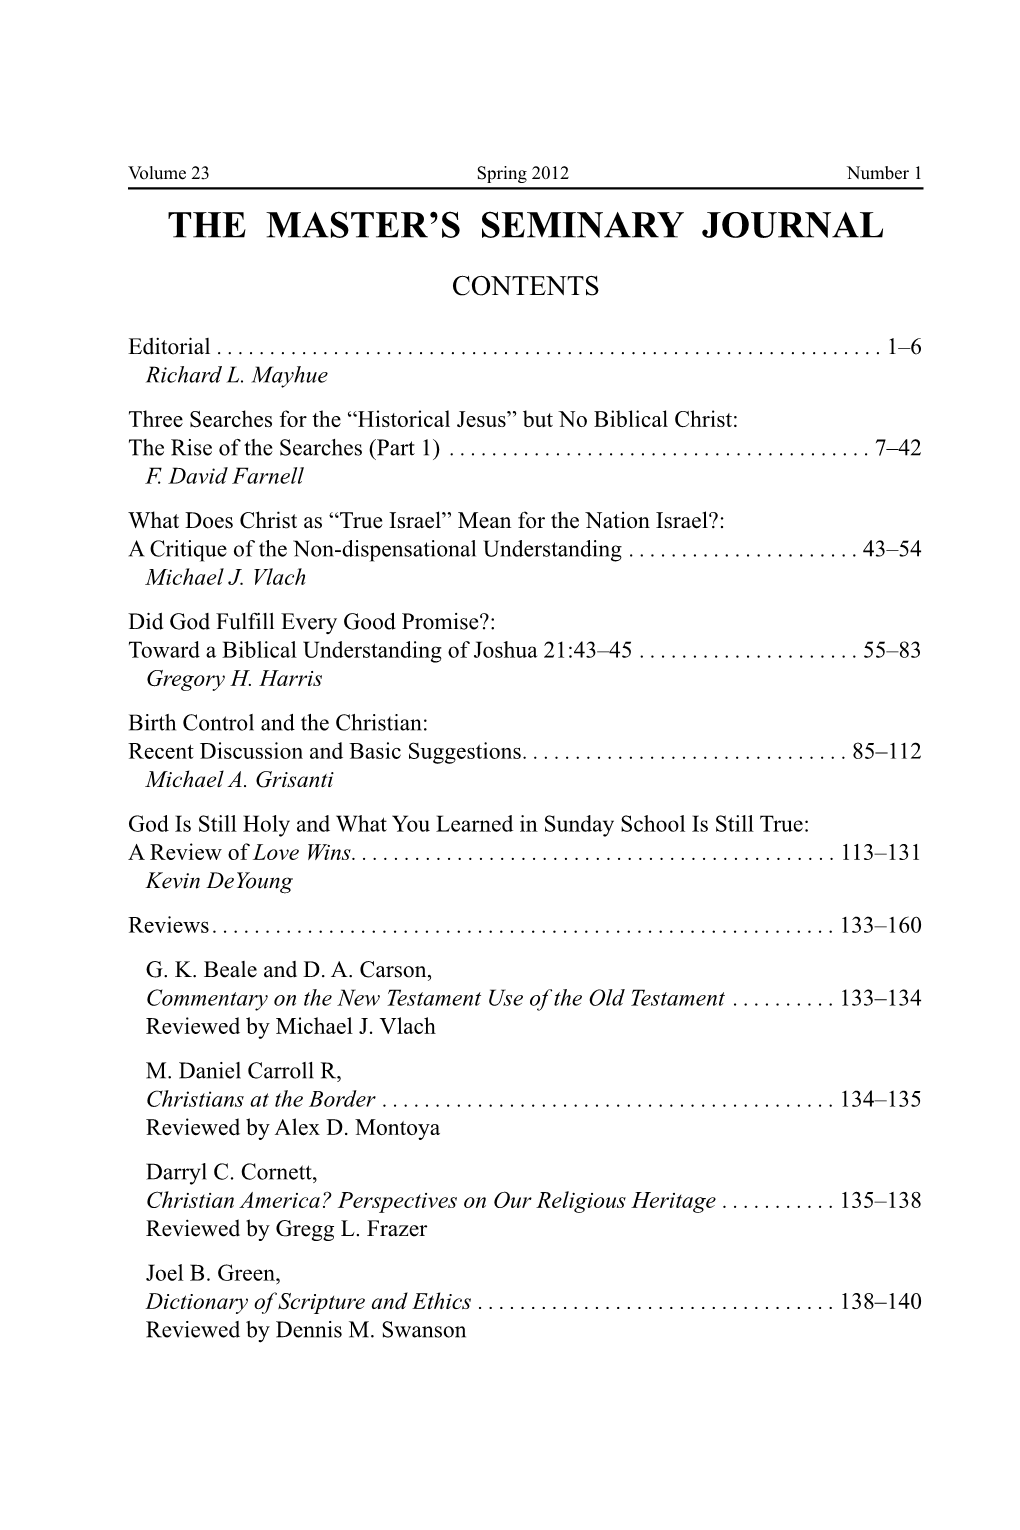 TMSJ Spring 2012--Contents Layout 1